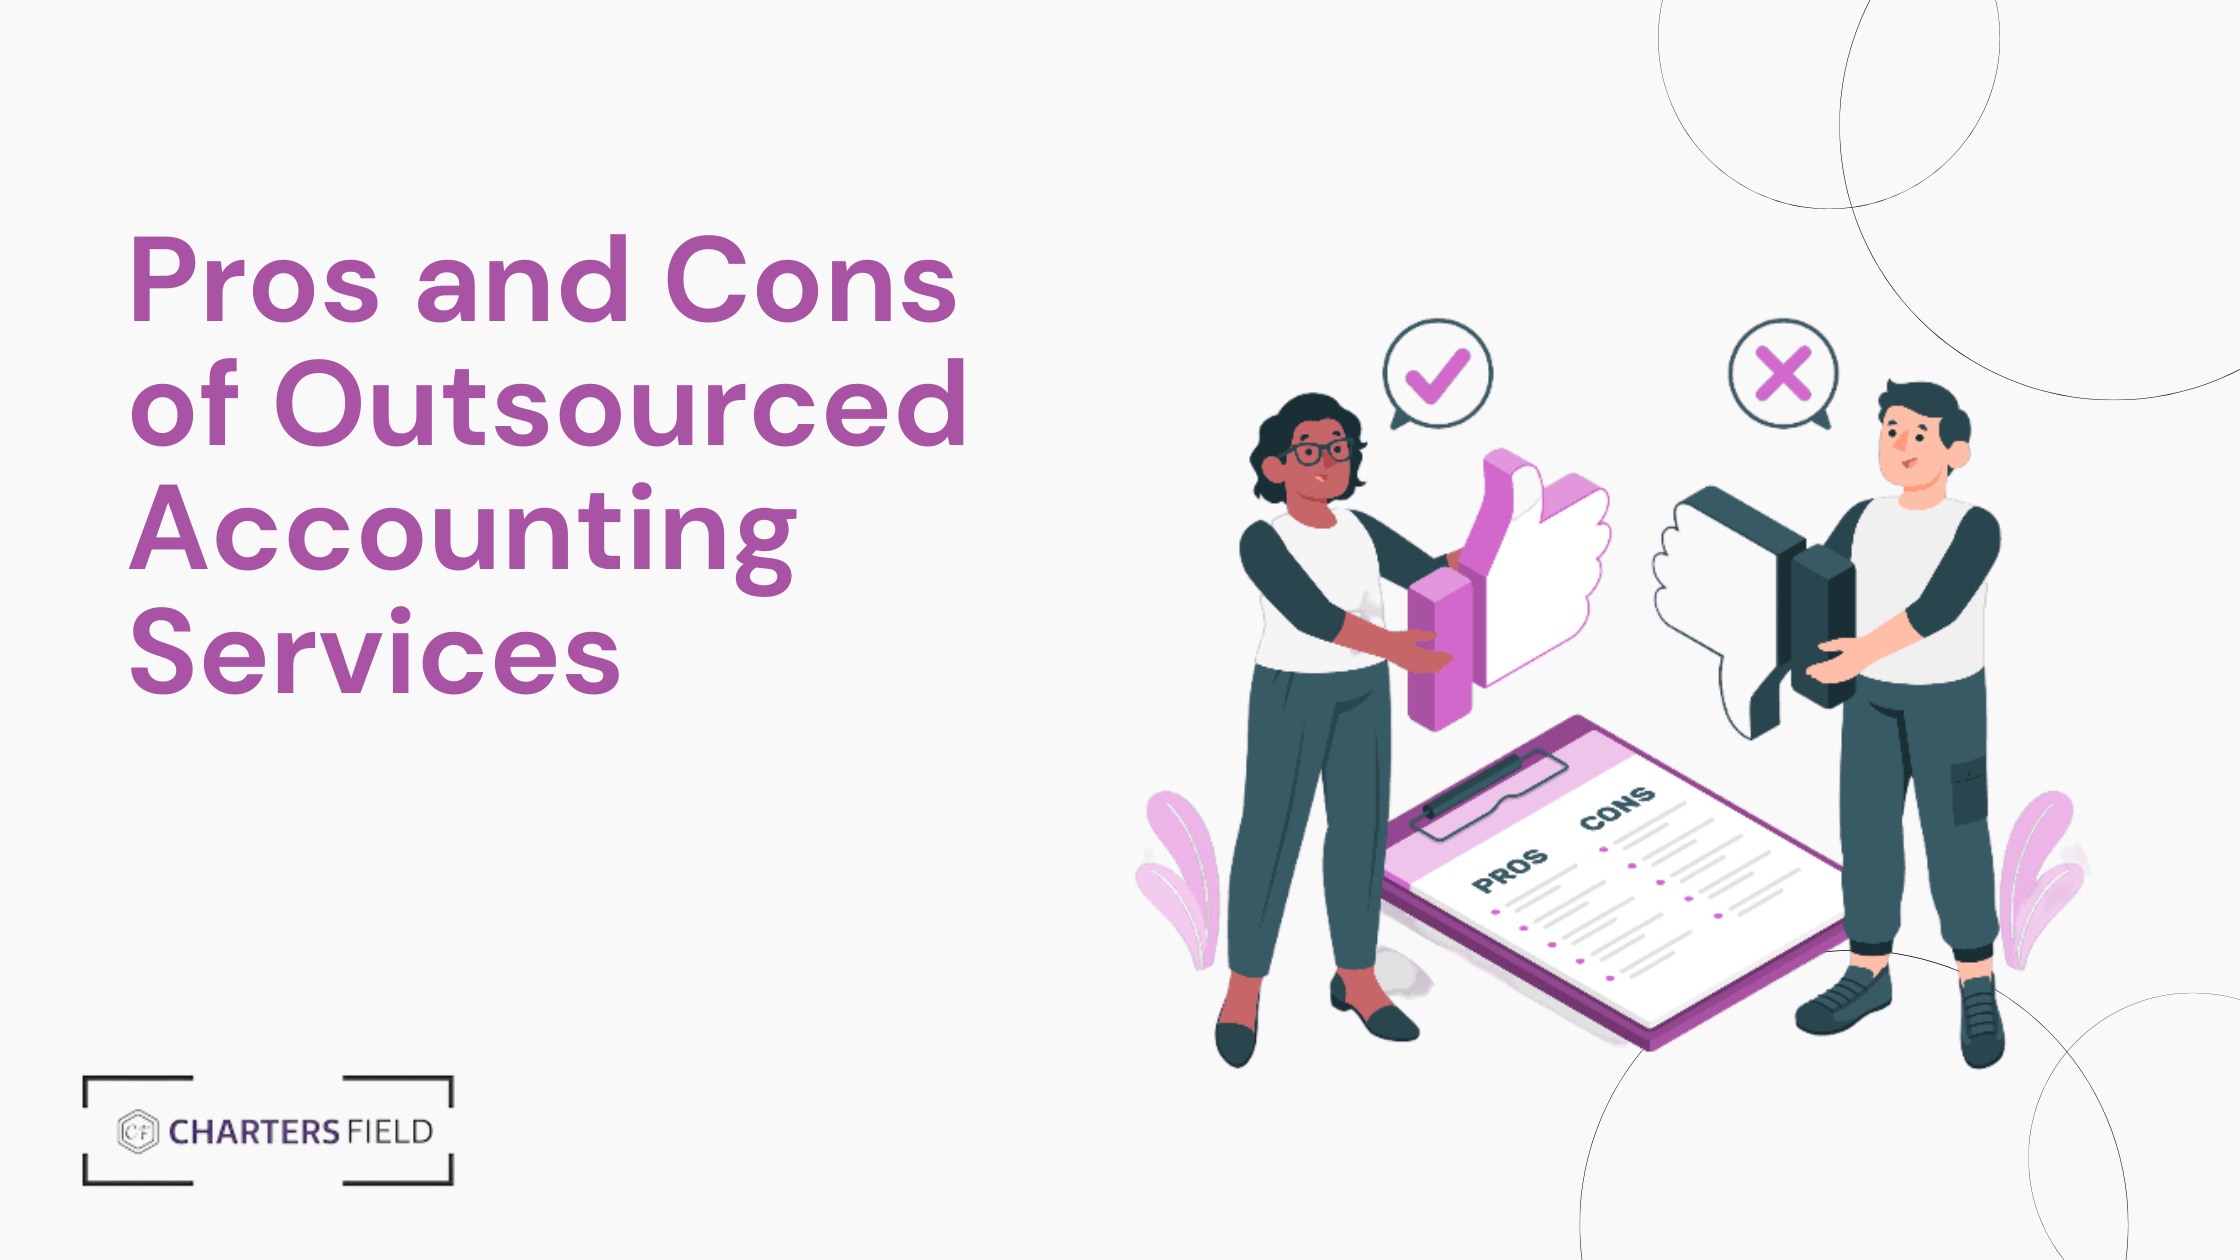 Pros and Cons of Outsourced Accounting Services